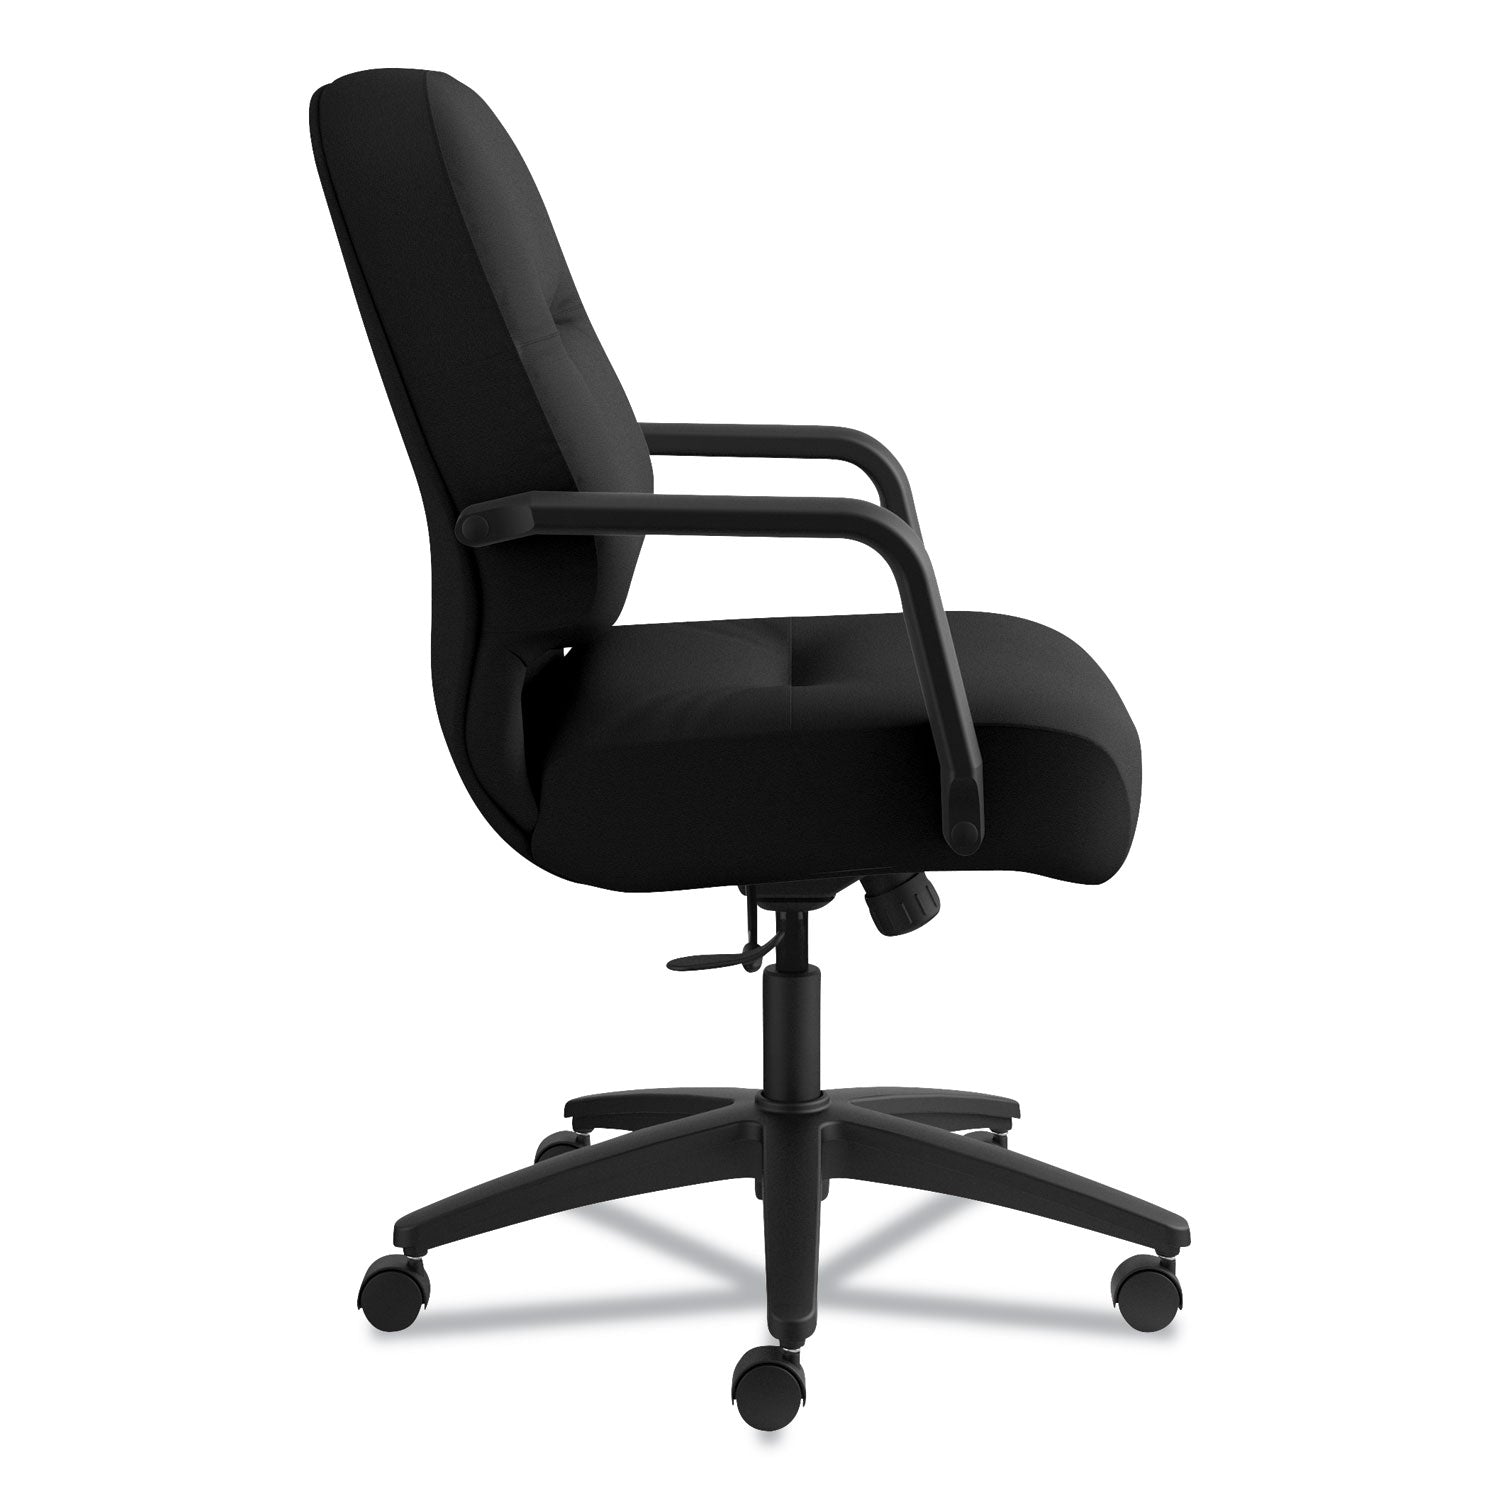 pillow-soft-2090-series-managerial-mid-back-swivel-tilt-chair-supports-up-to-300-lb-17-to-21-seat-height-black_hon2092cu10t - 4